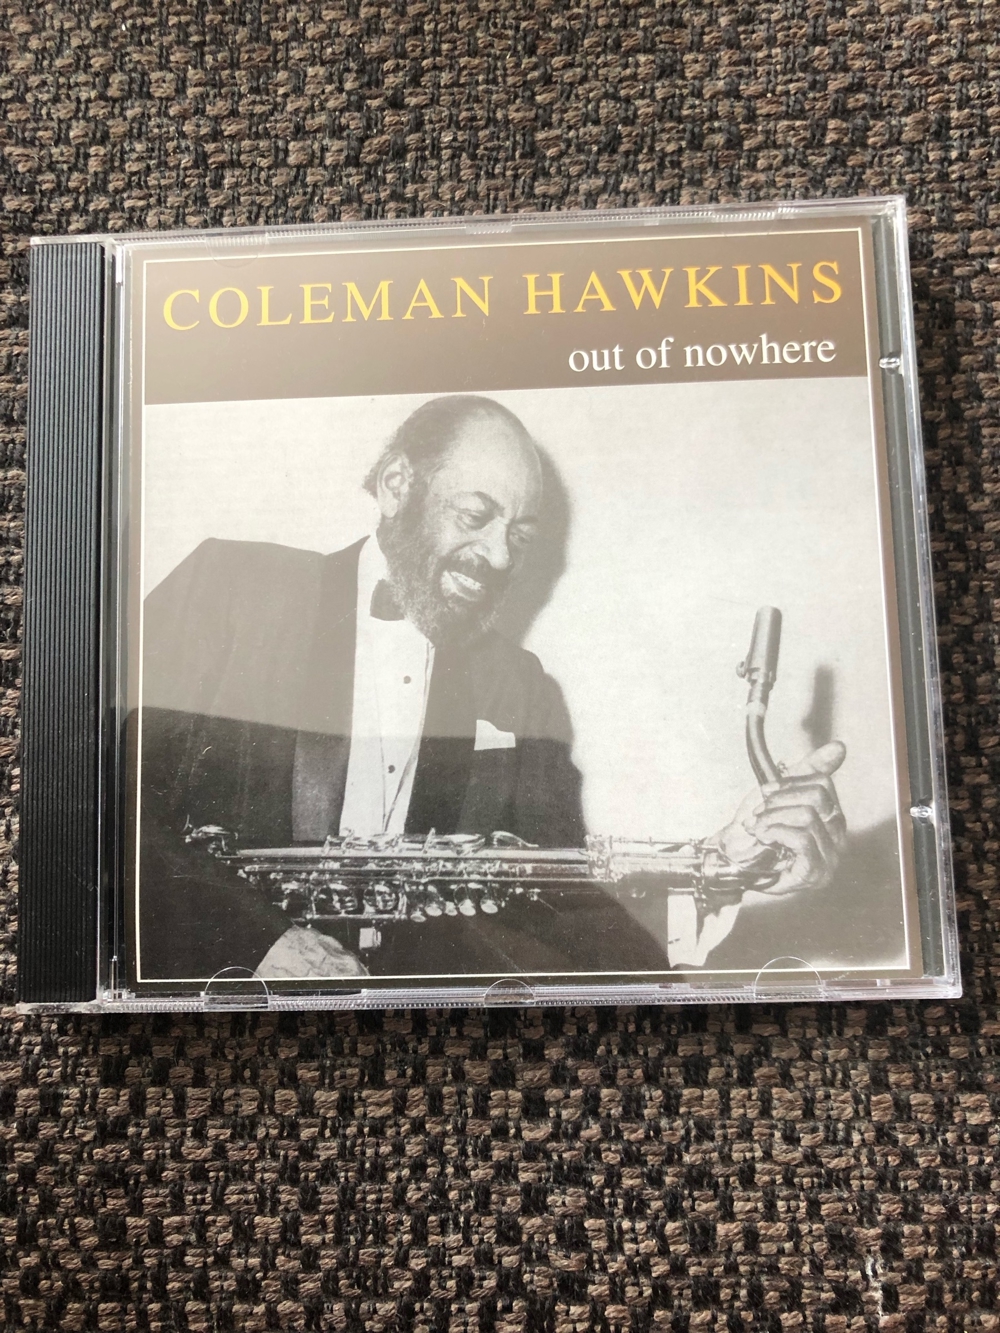 Coleman Hawkins: out of nowhere